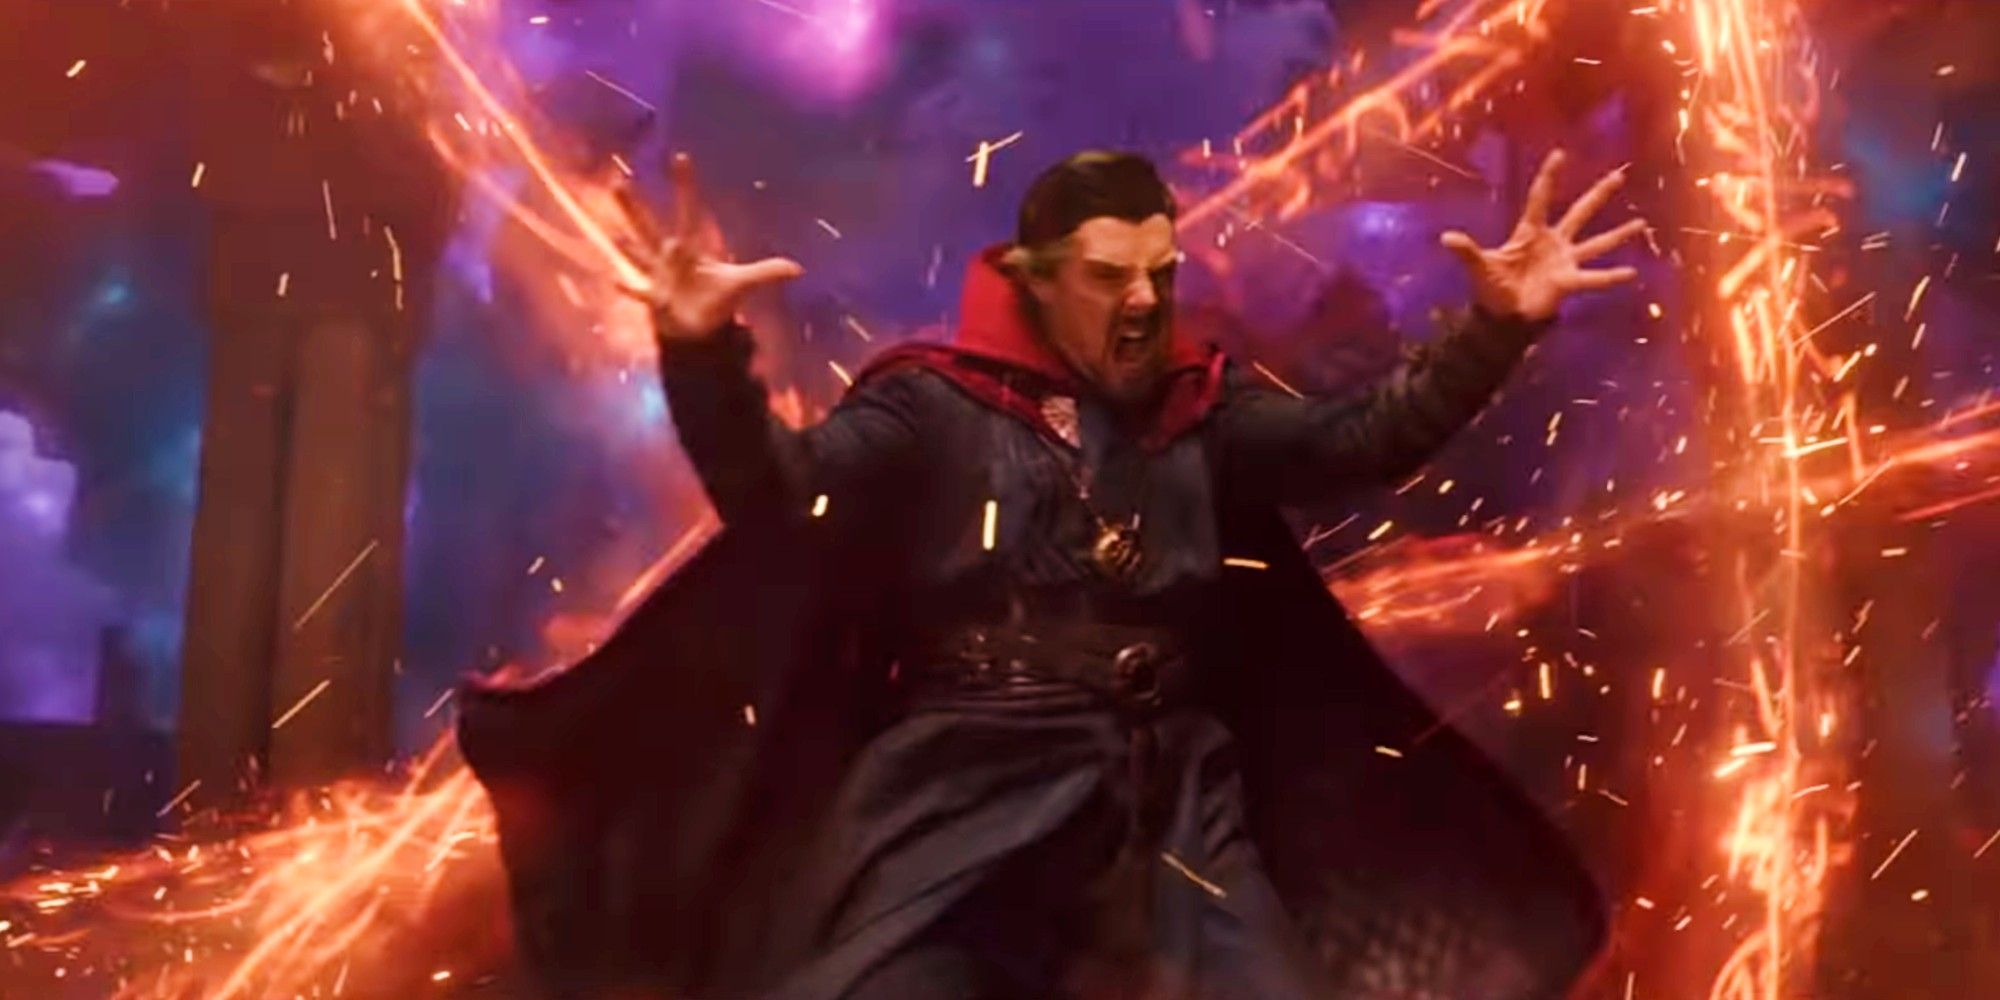 Doctor Strange tries to contain a spell in Spider-Man: No Way Home.